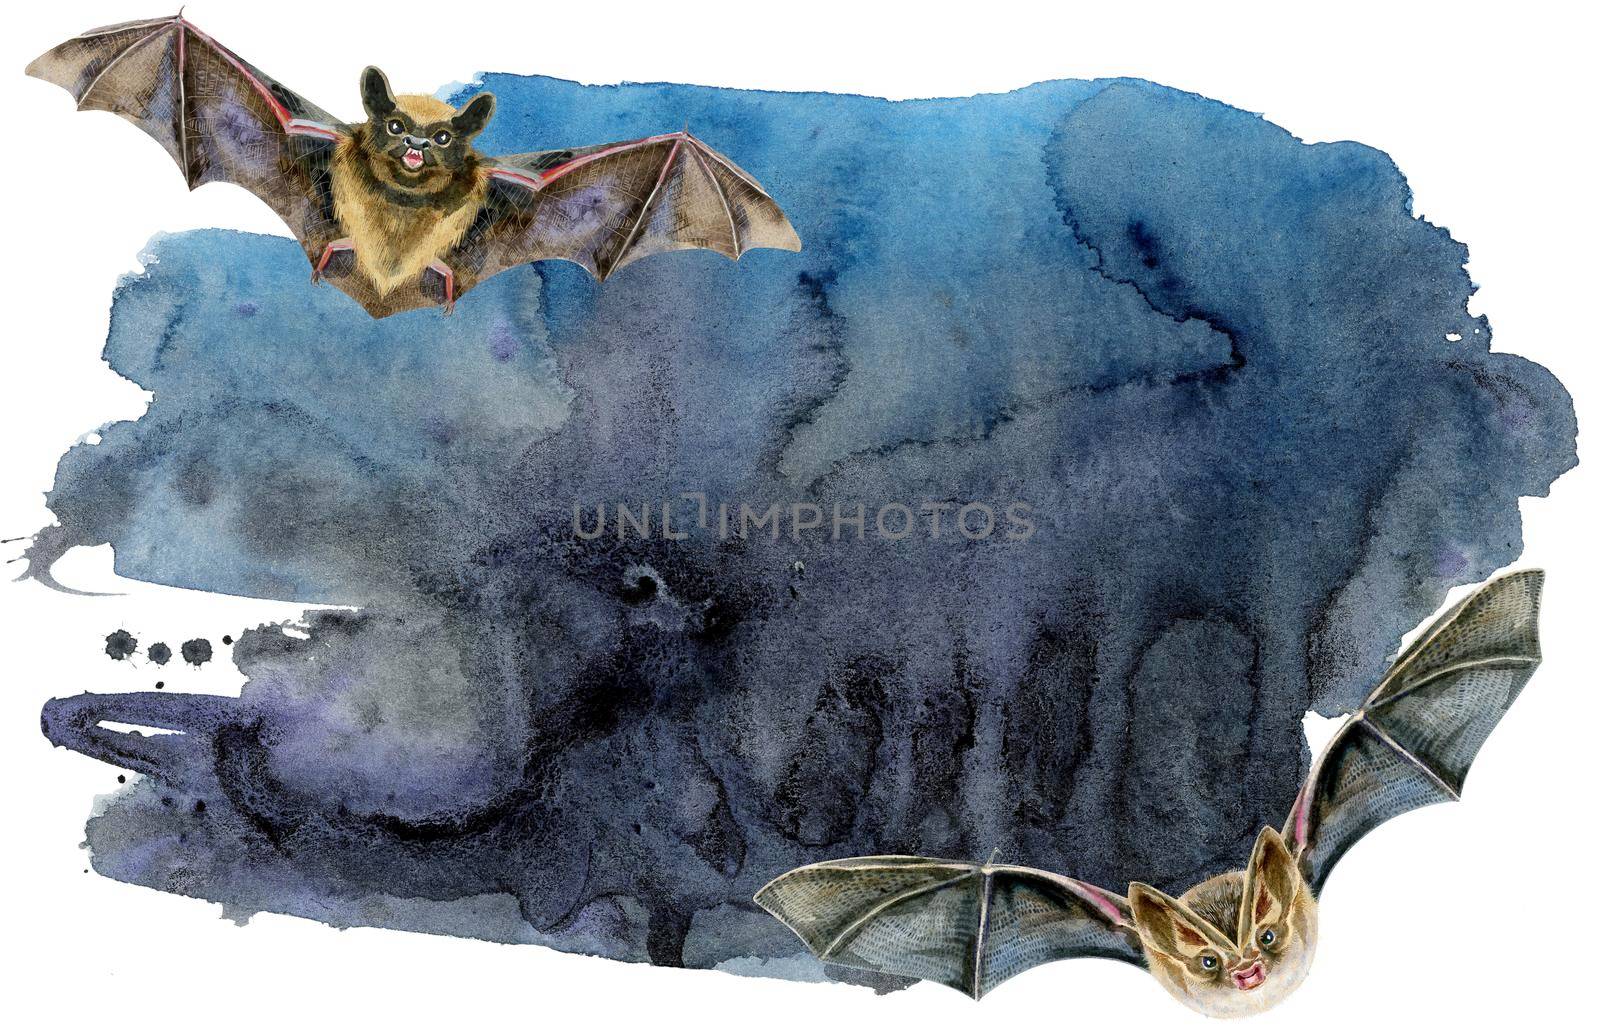 Abstract watercolor brush strokes painted background with bats in flight. Texture paper.